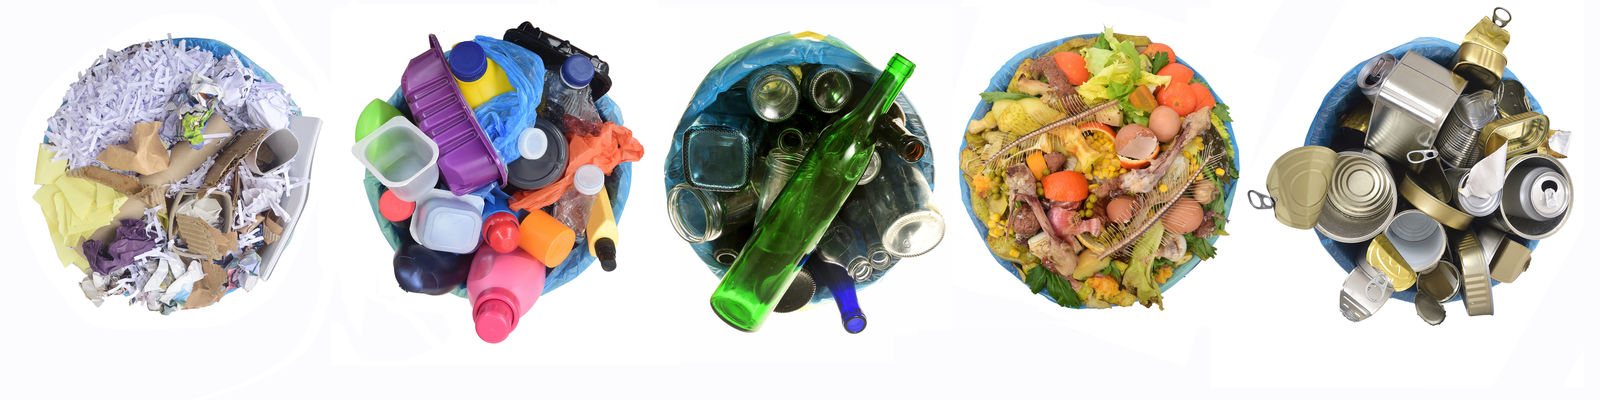 Recyclable materials - paper, plastic, glass, food, metal